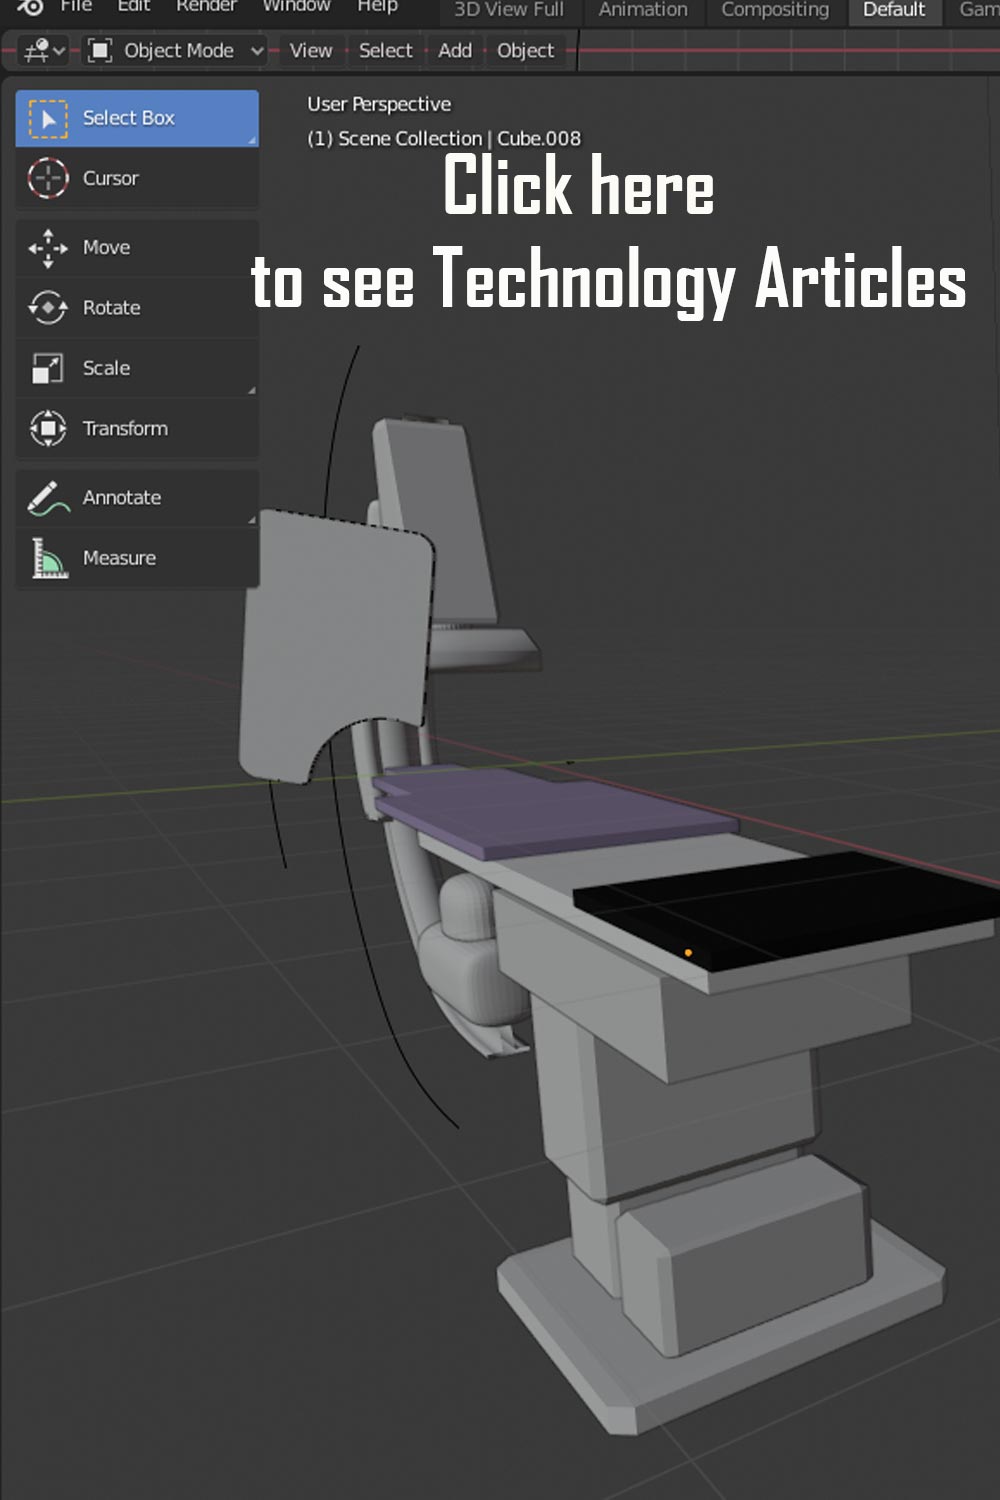 Click on image to see technology articles